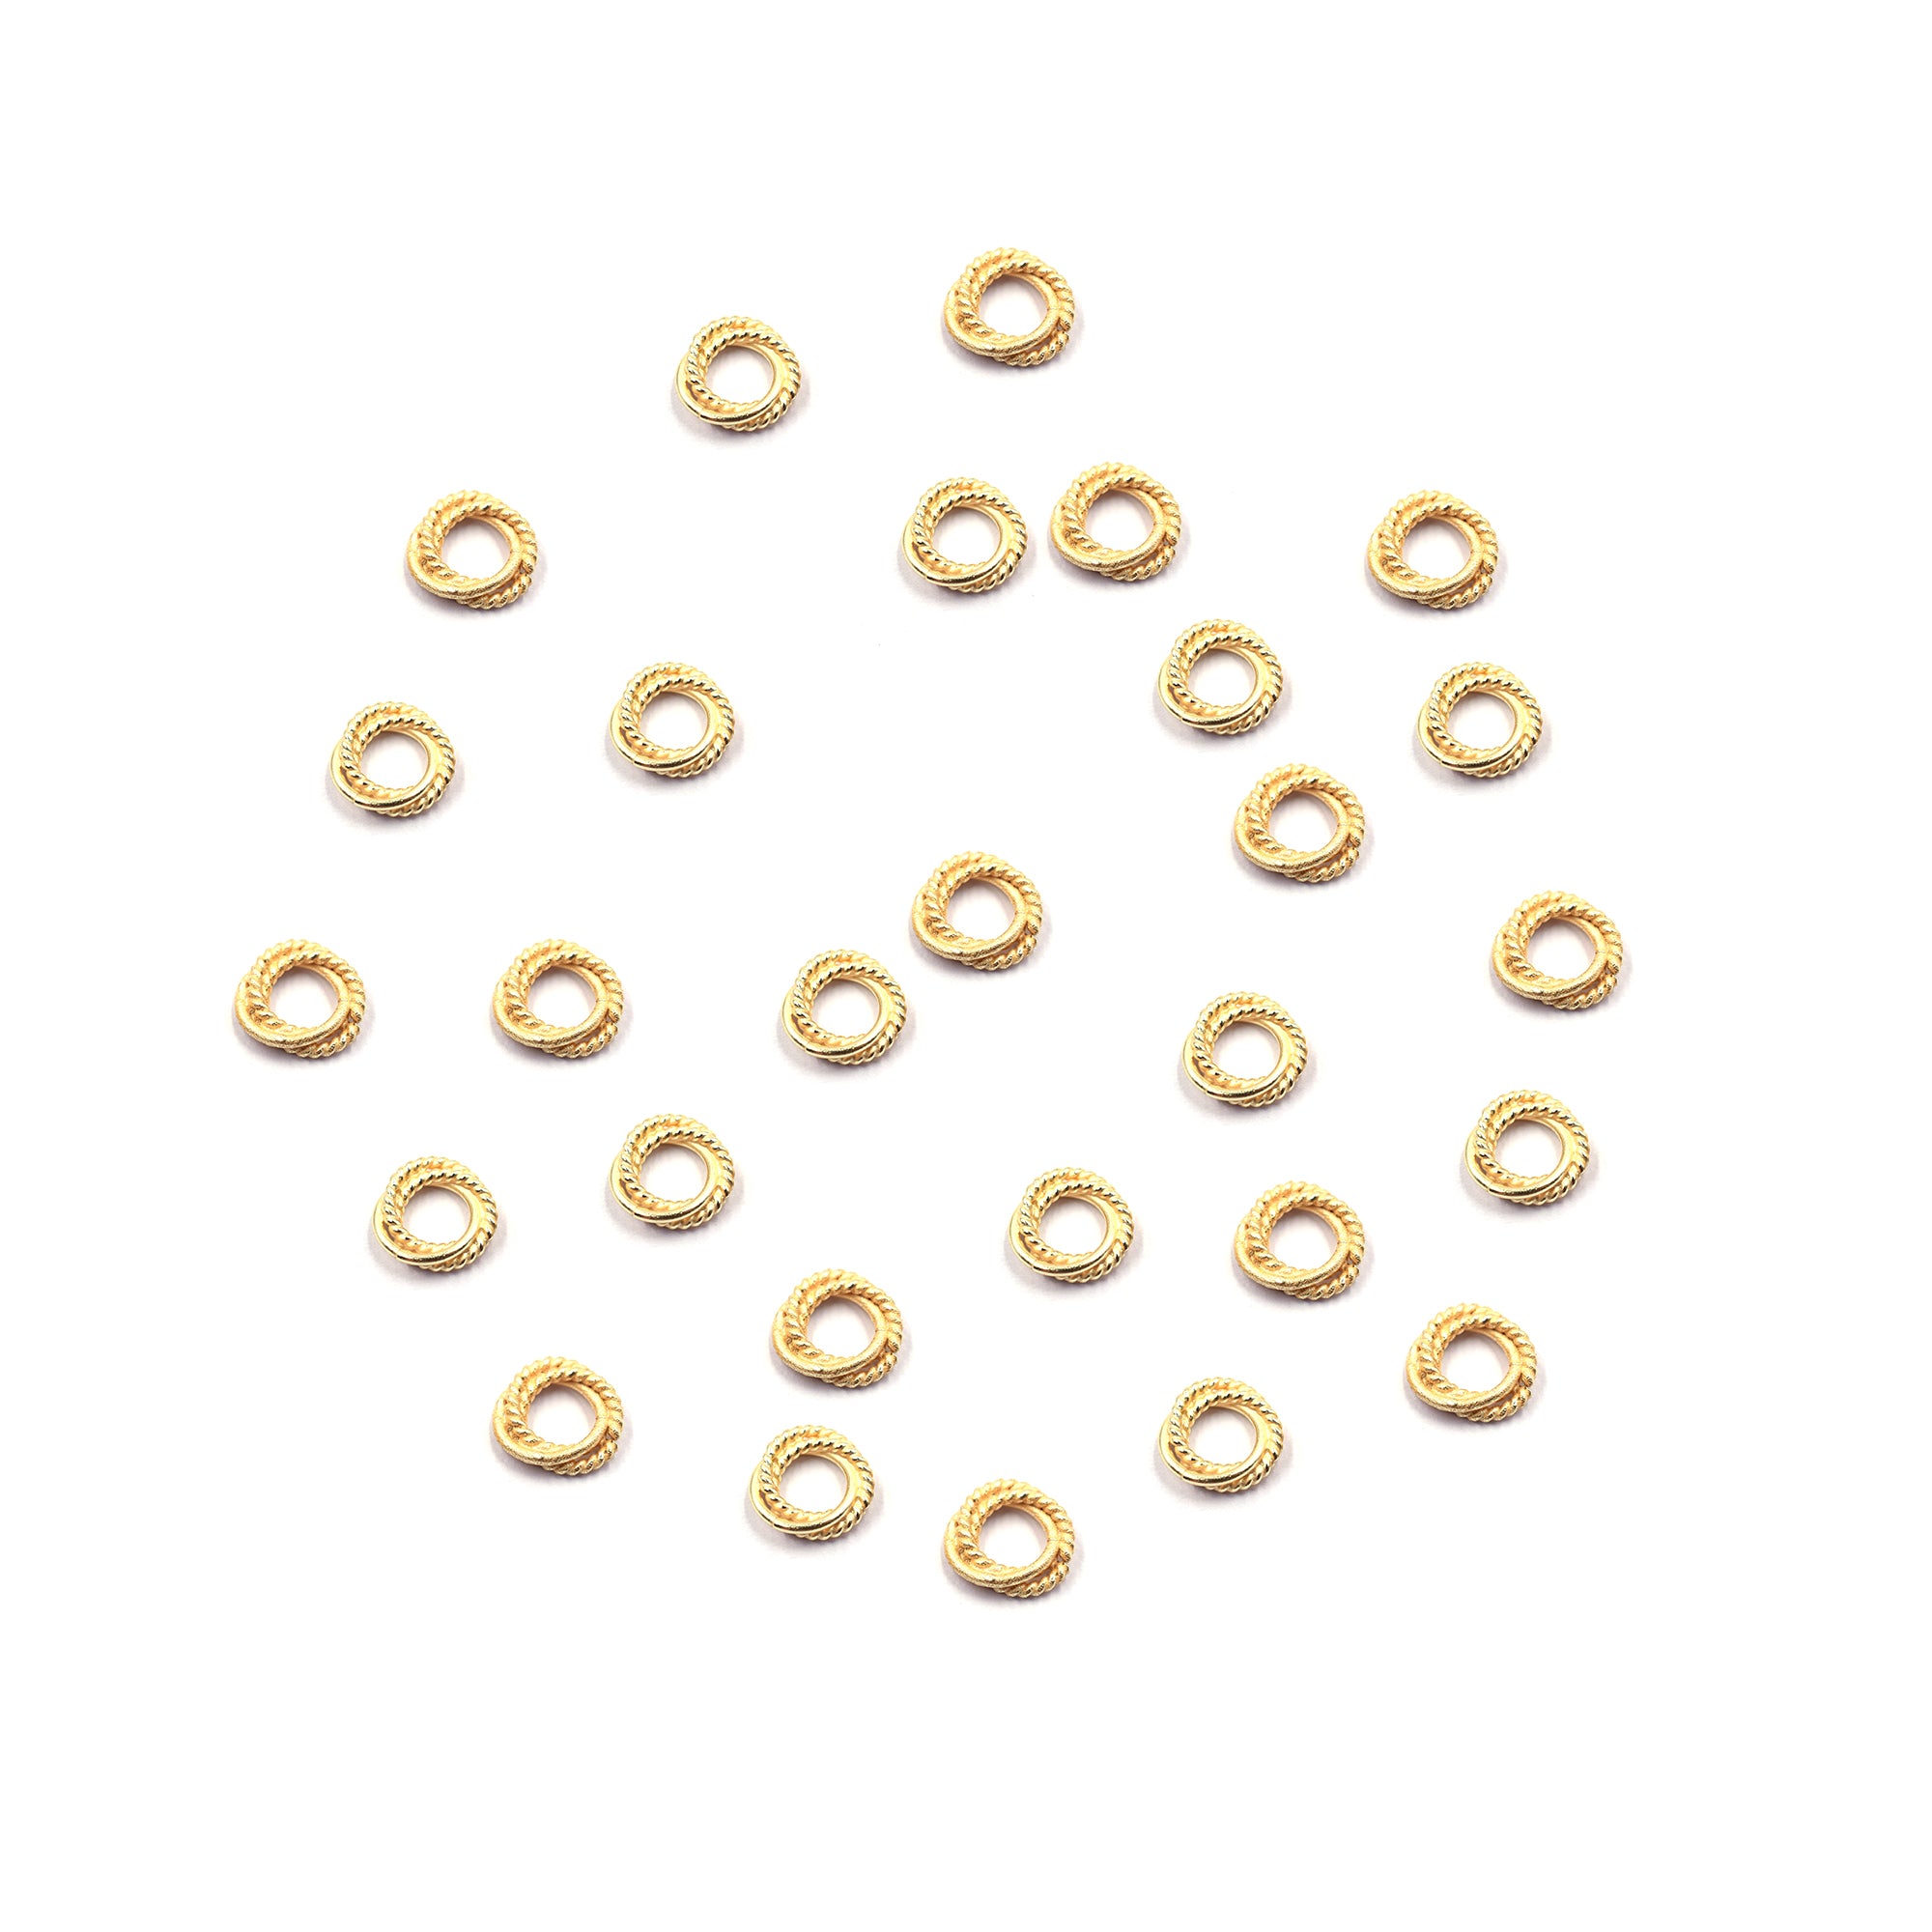 30 Pcs 10mm Twisted Wire Jump Ring Gold Plated Copper